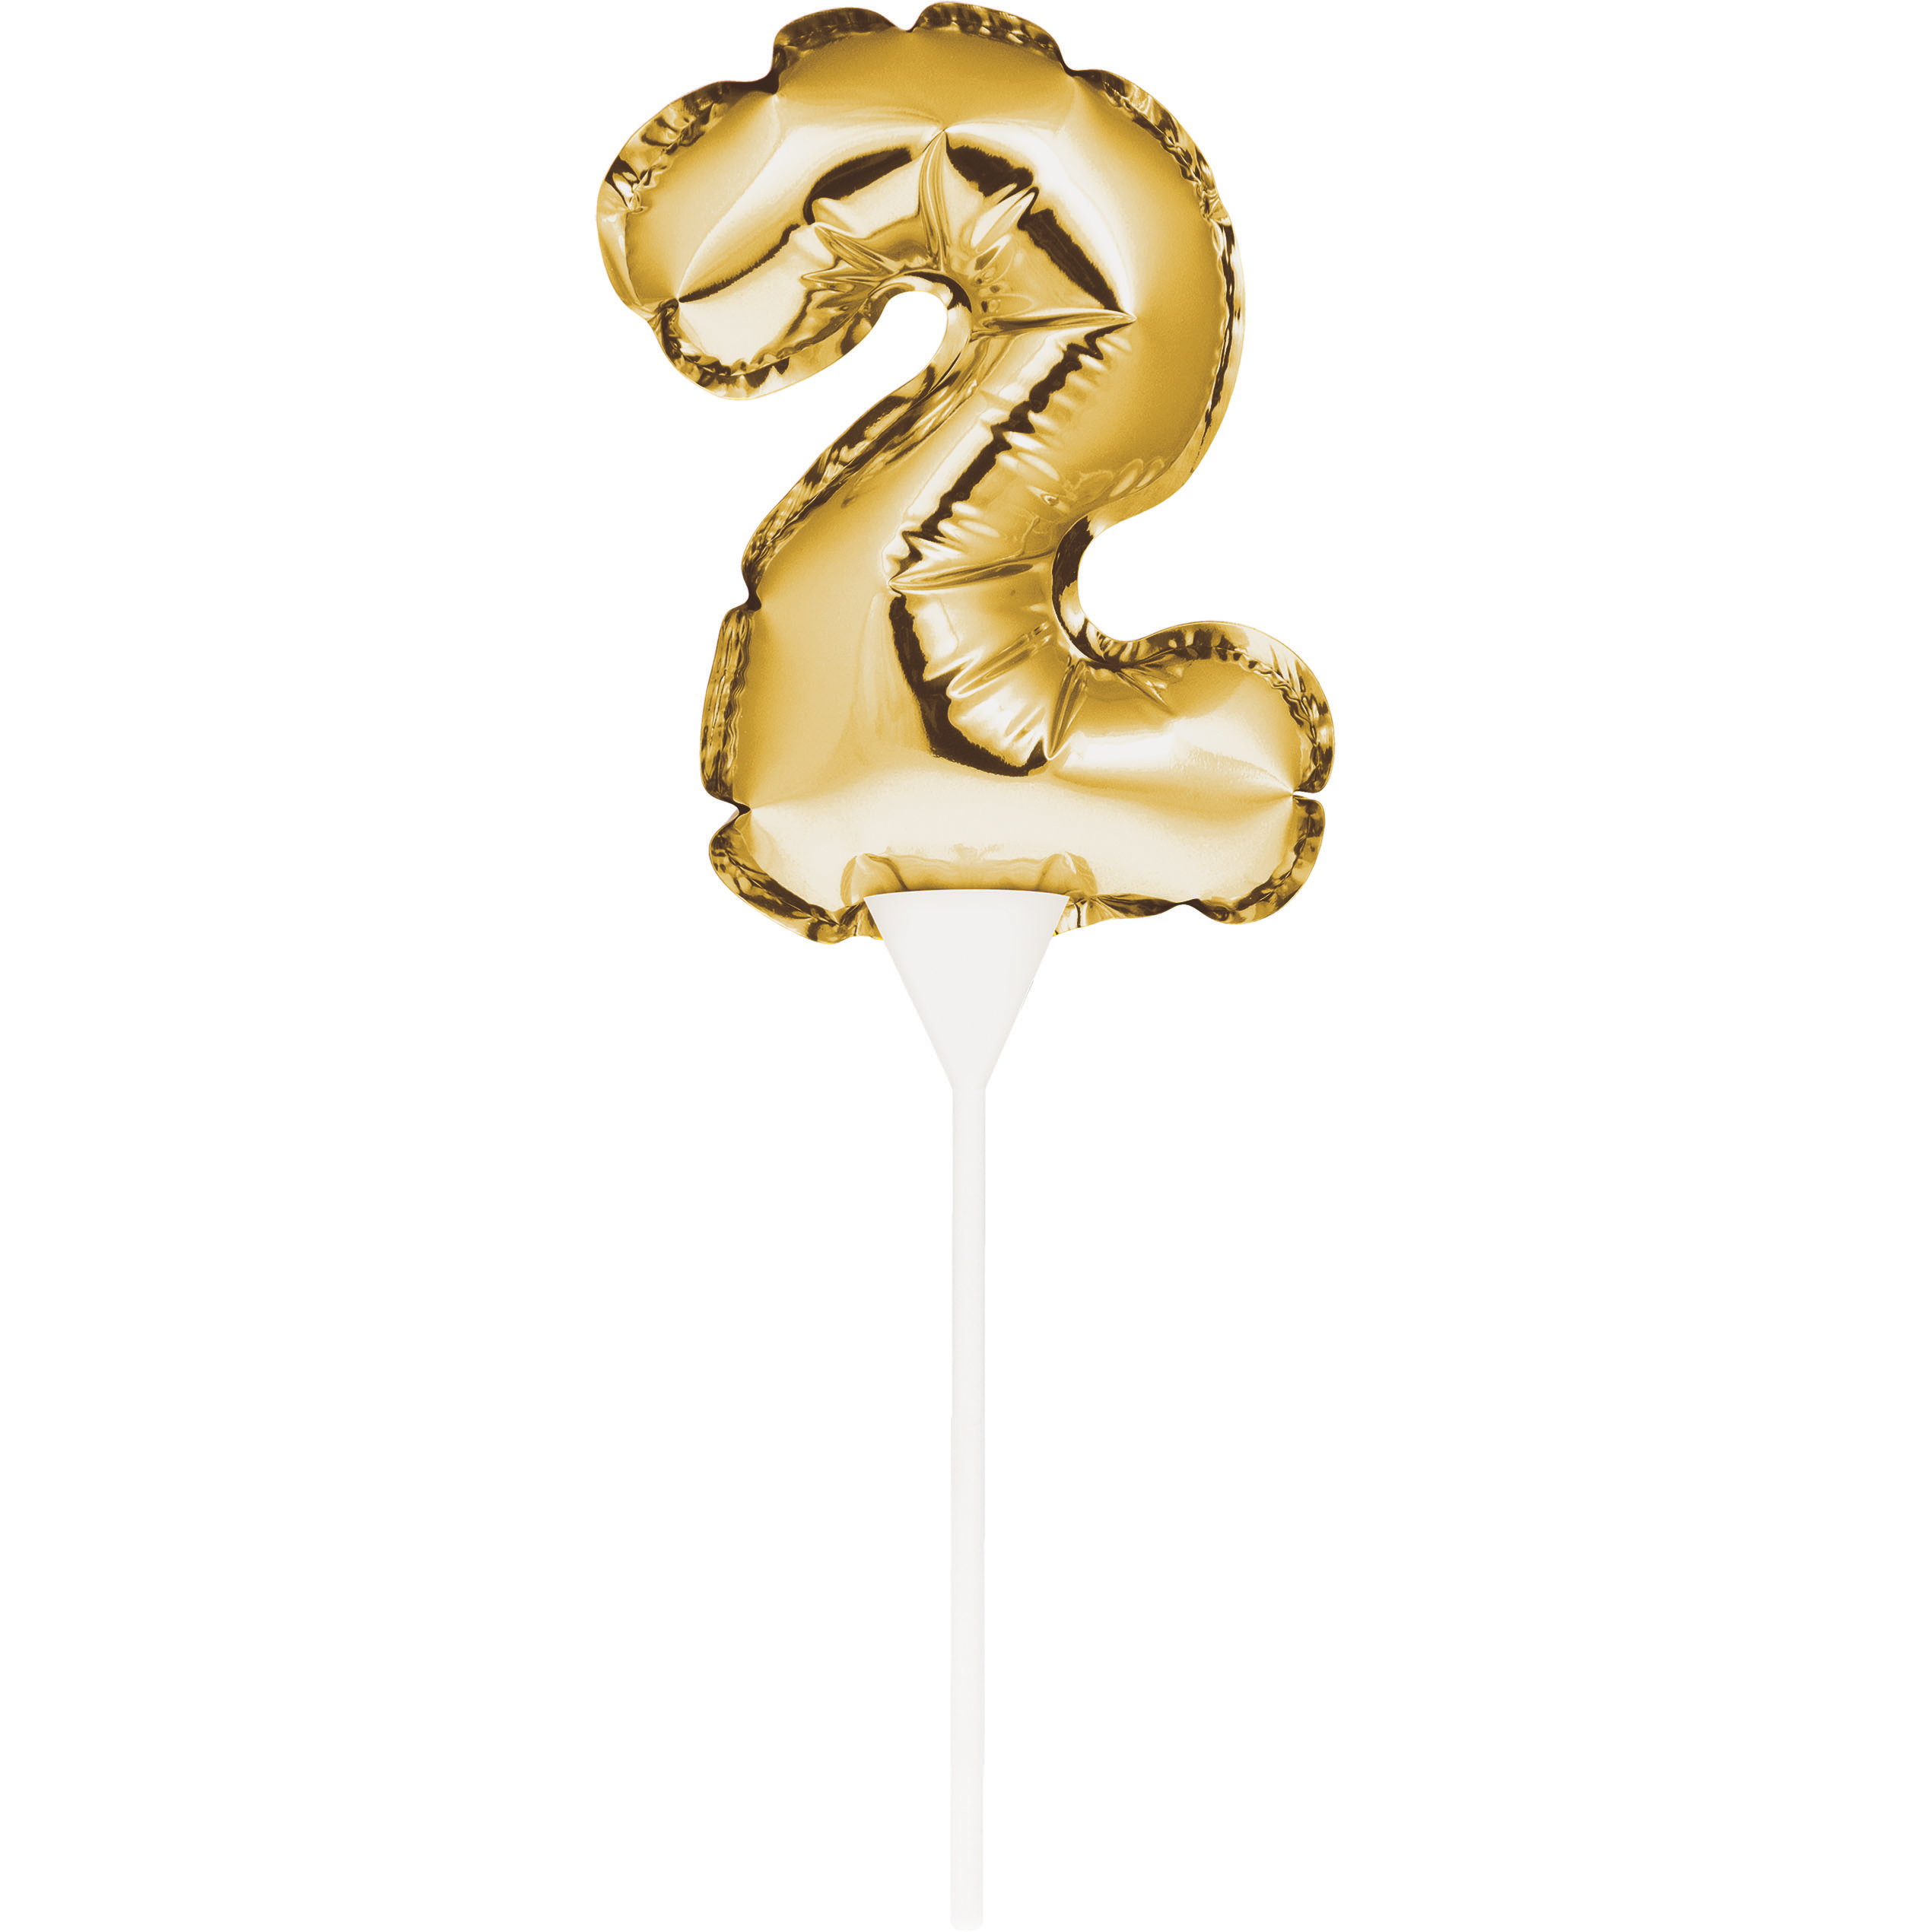 Self-Inflating Gold Mini Balloon Cake Topper - Number 2